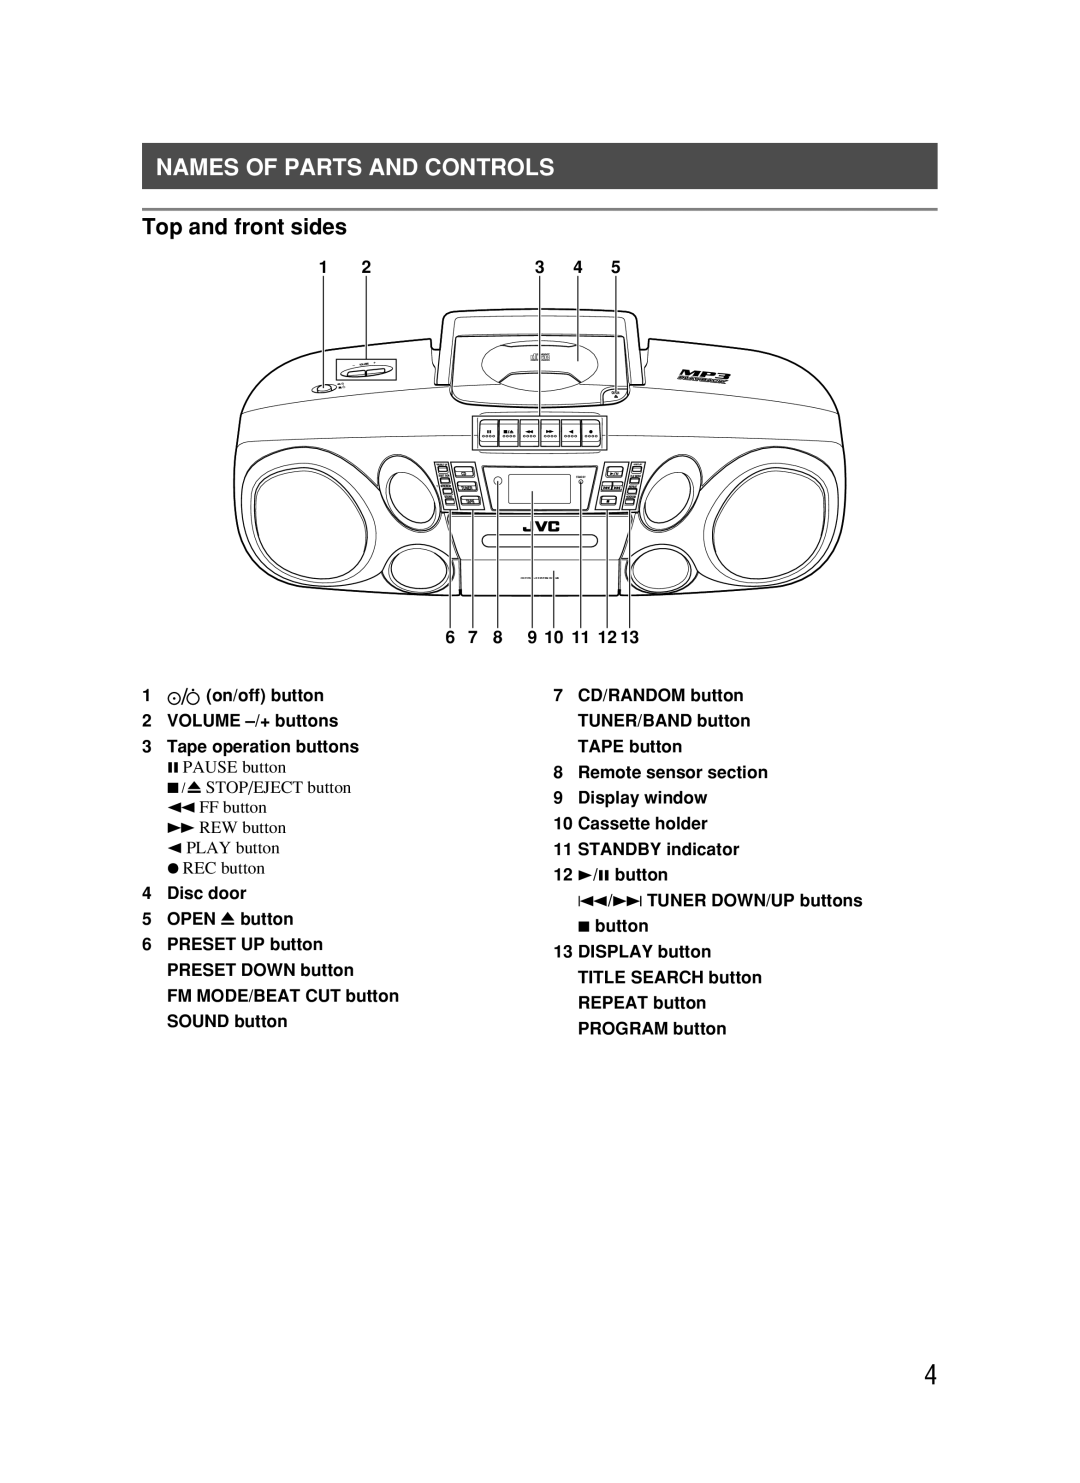 JVC RC-BM5 manual Names Of Parts And Controls, Top and front sides 